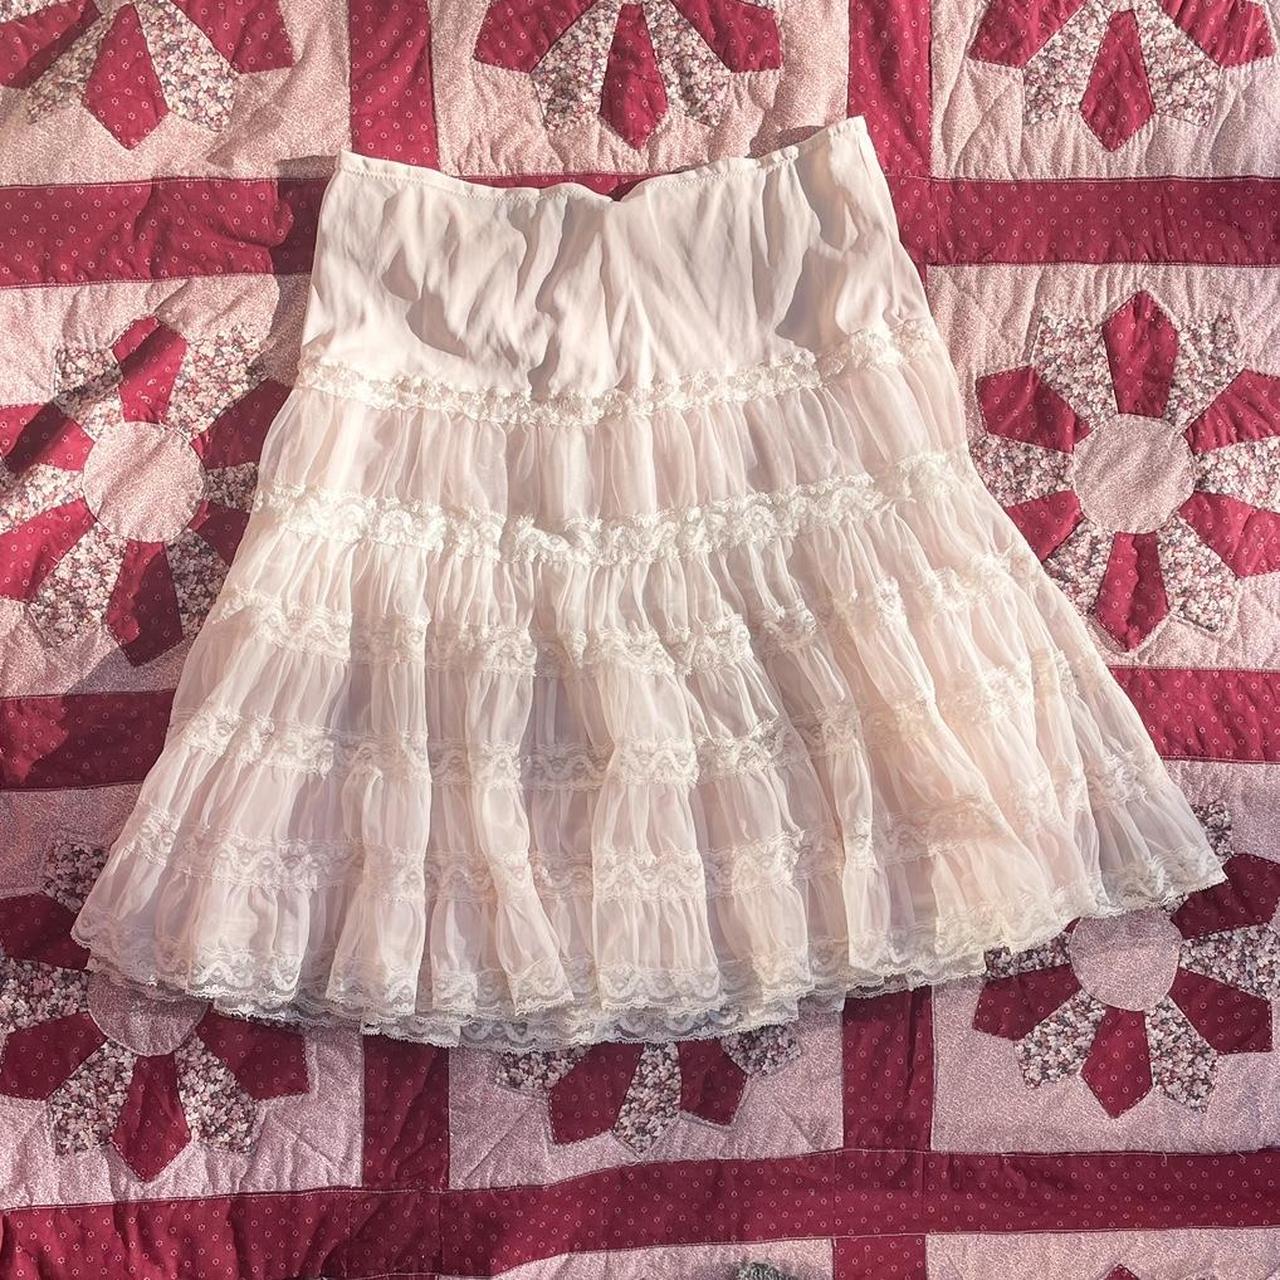 American Vintage Women's Cream and Pink Skirt